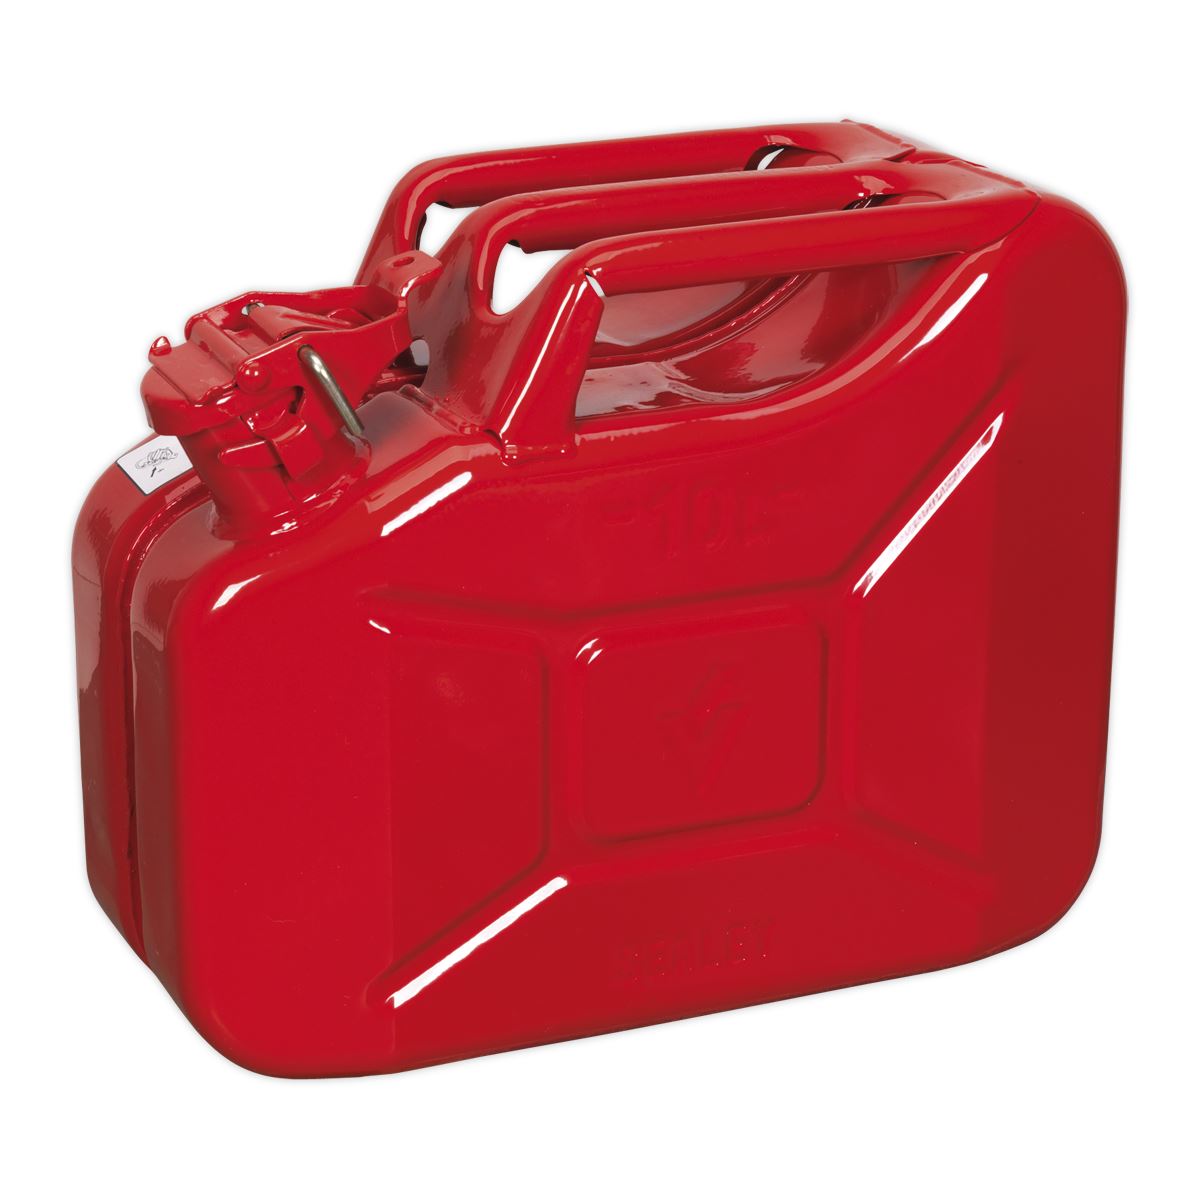 Sealey Jerry Can 10L Red Fuel Tank